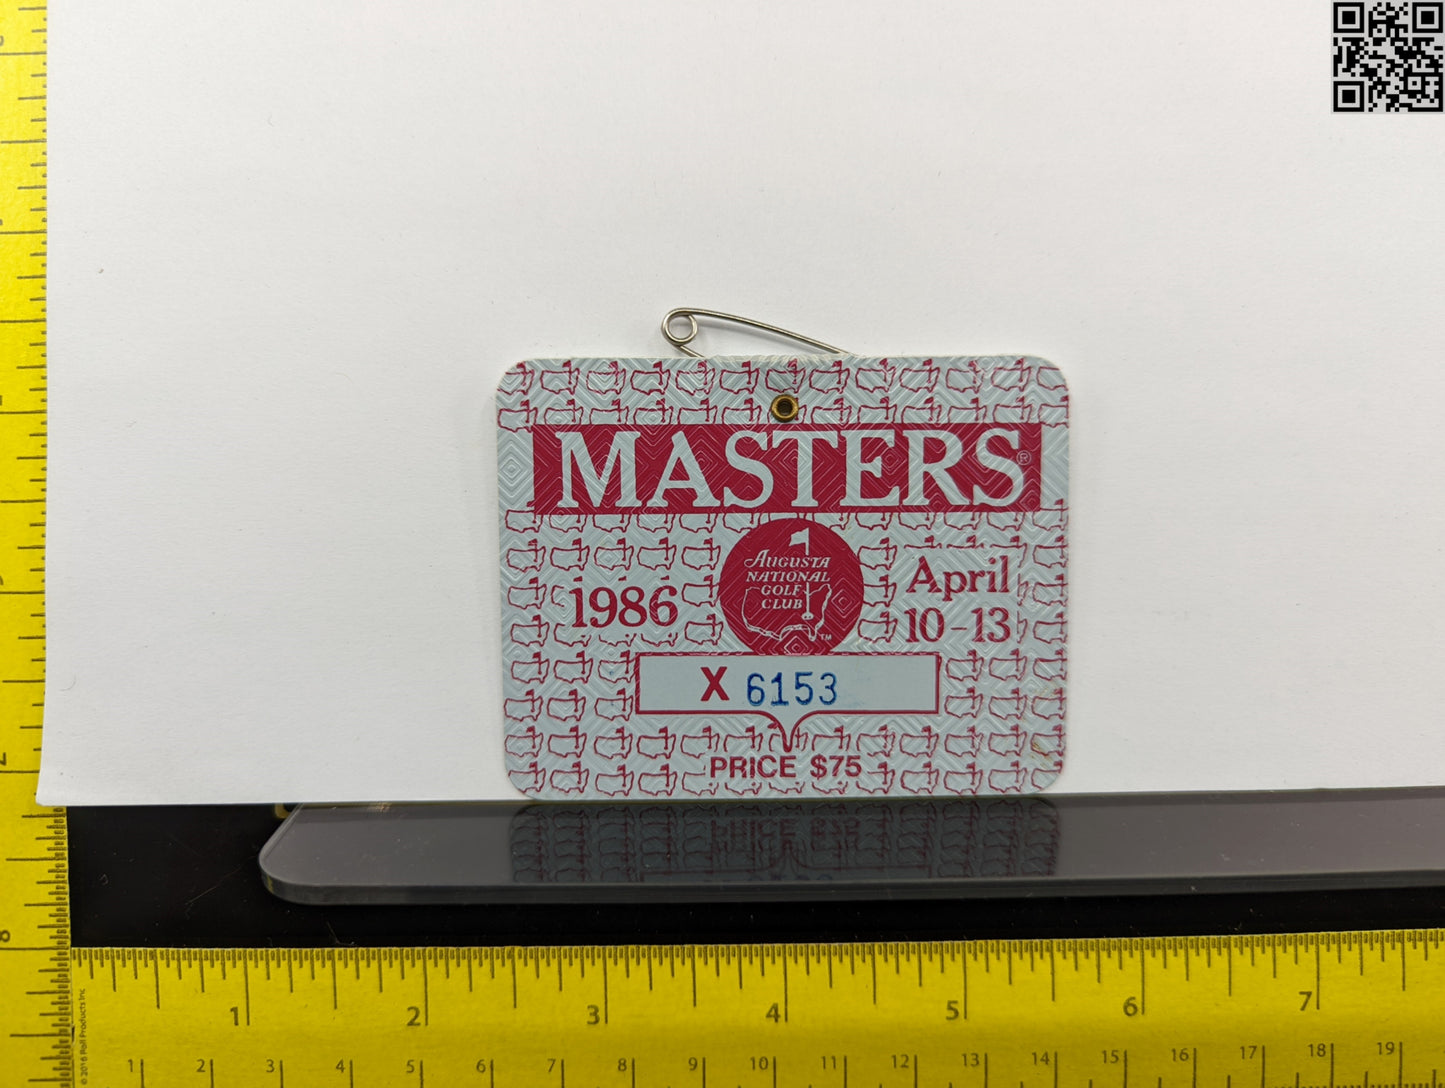 1986 Masters Tournament Series Badge - Augusta National Golf Club - Jack Nicklaus 6th Masters Win 18th Major